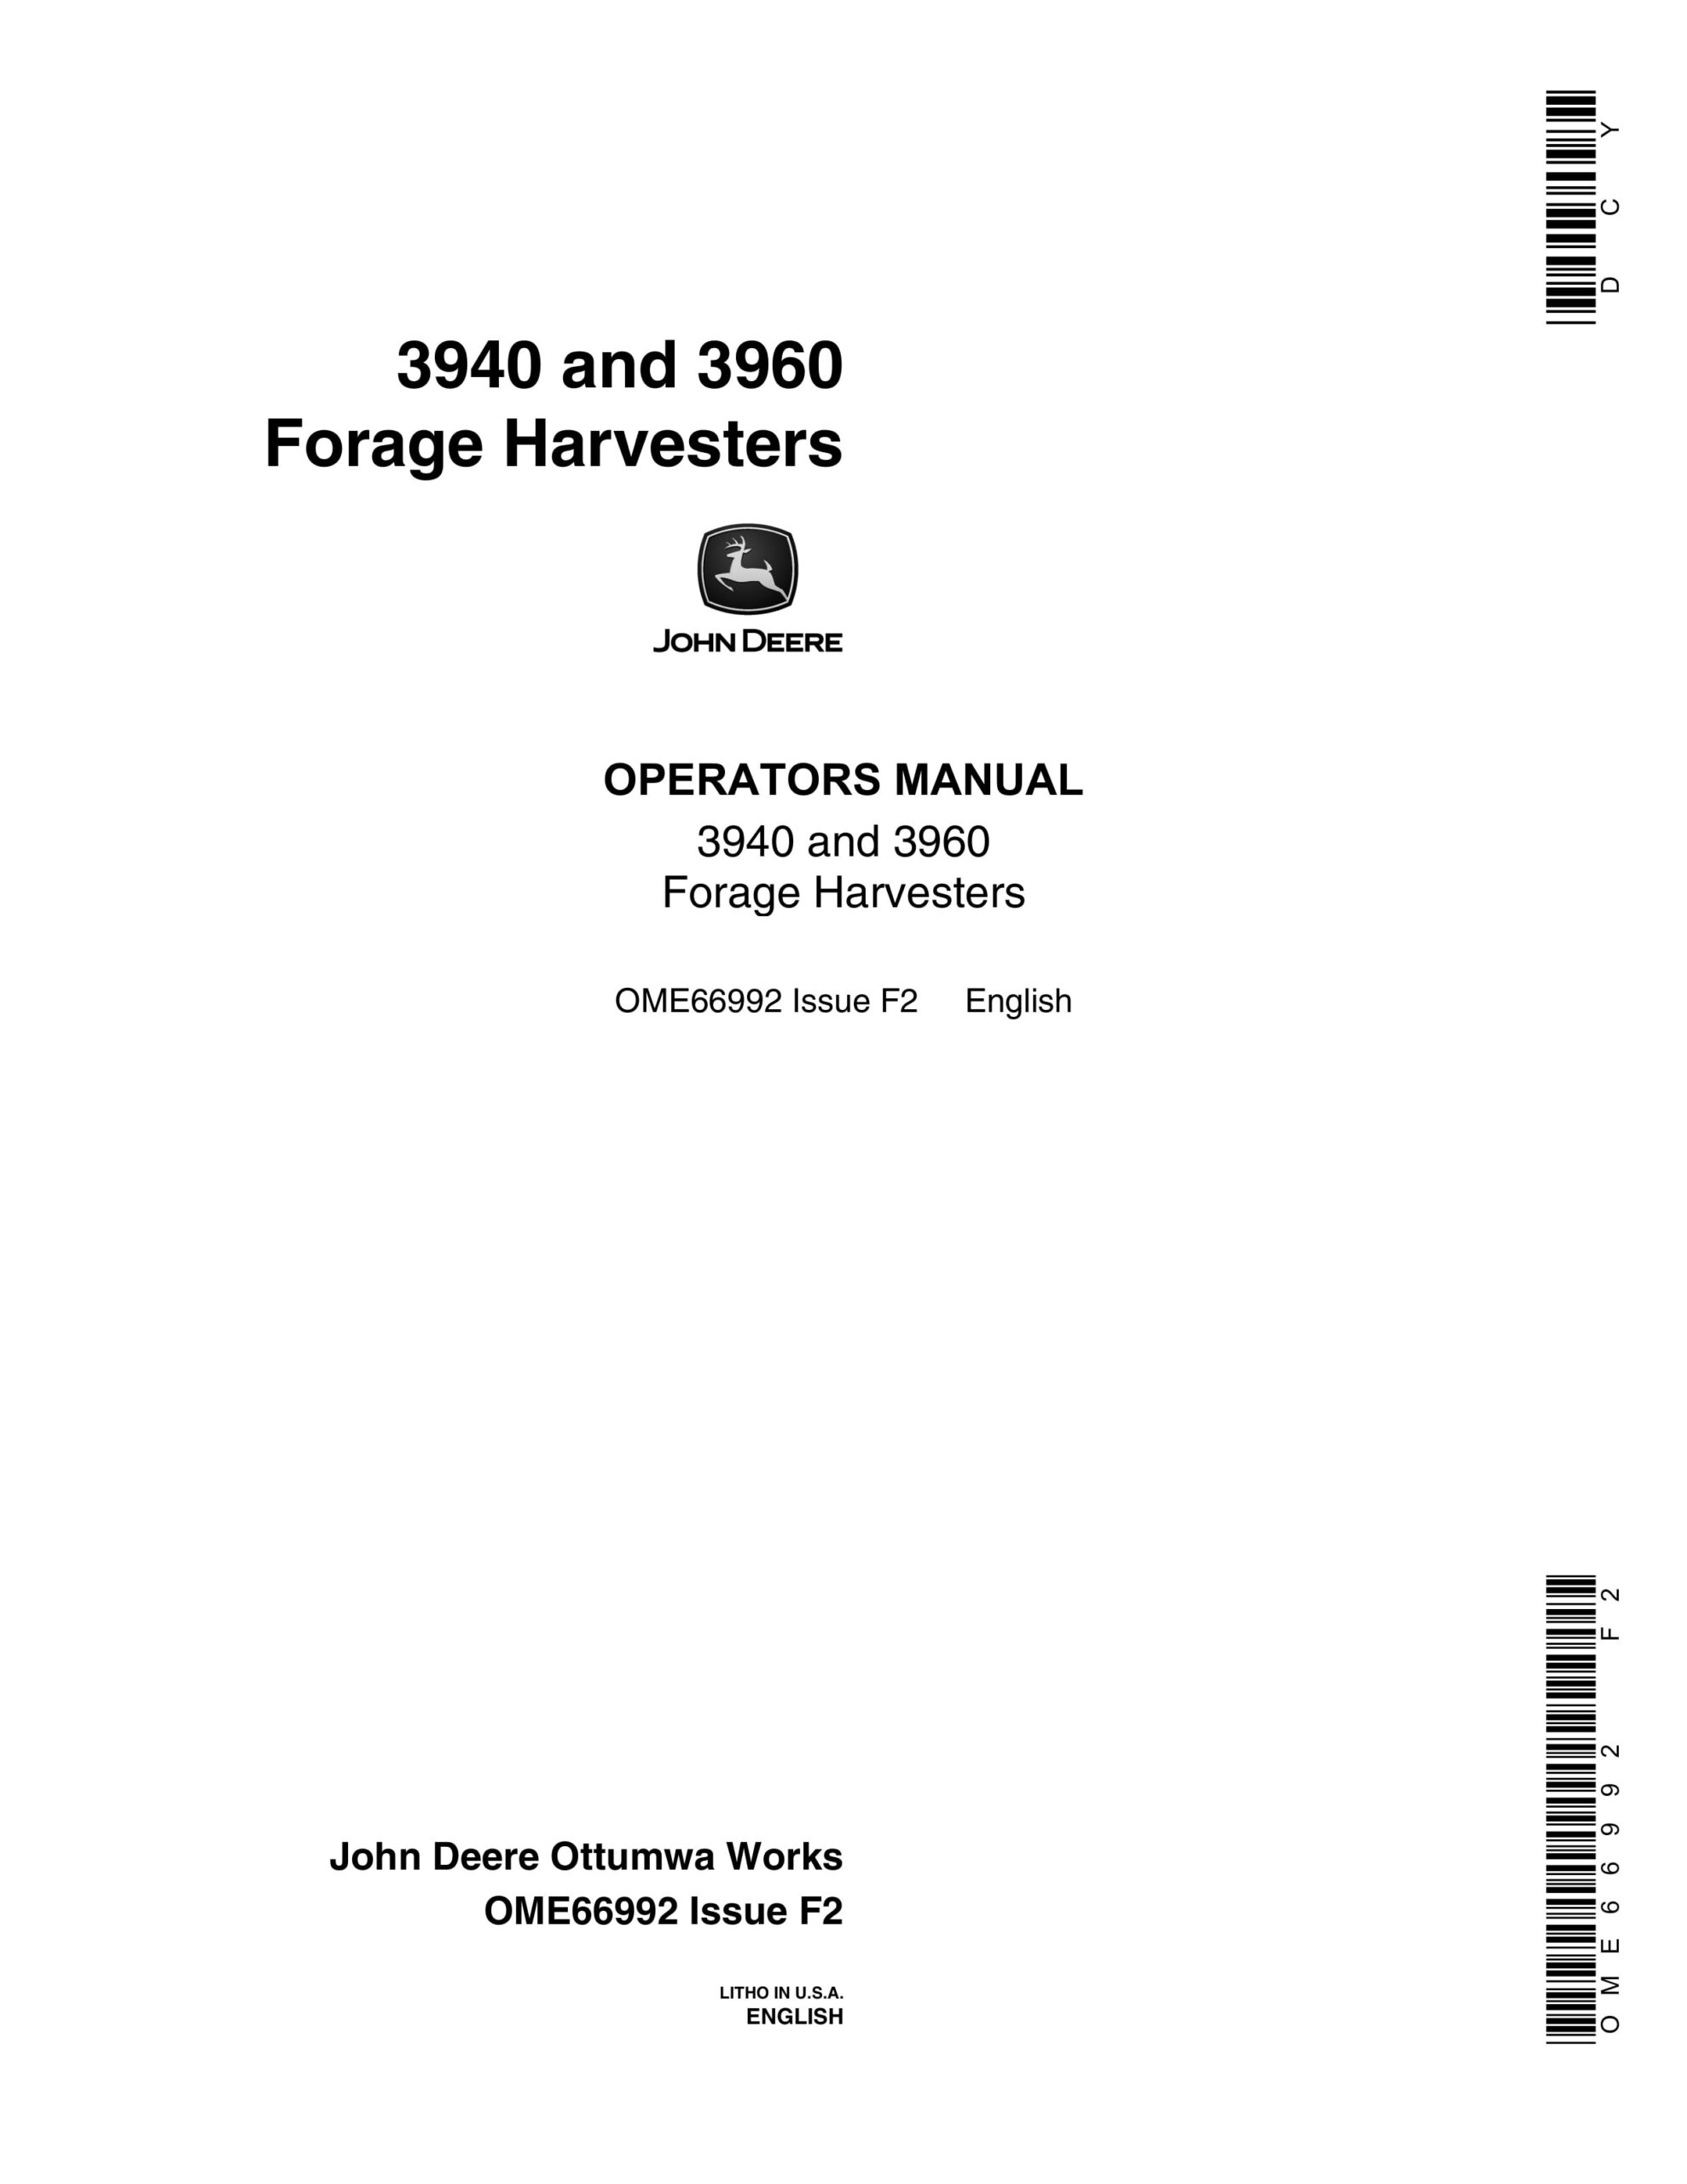 John Deere 3940 and 3960 Forage Harvesters Operator Manual OME66992-1